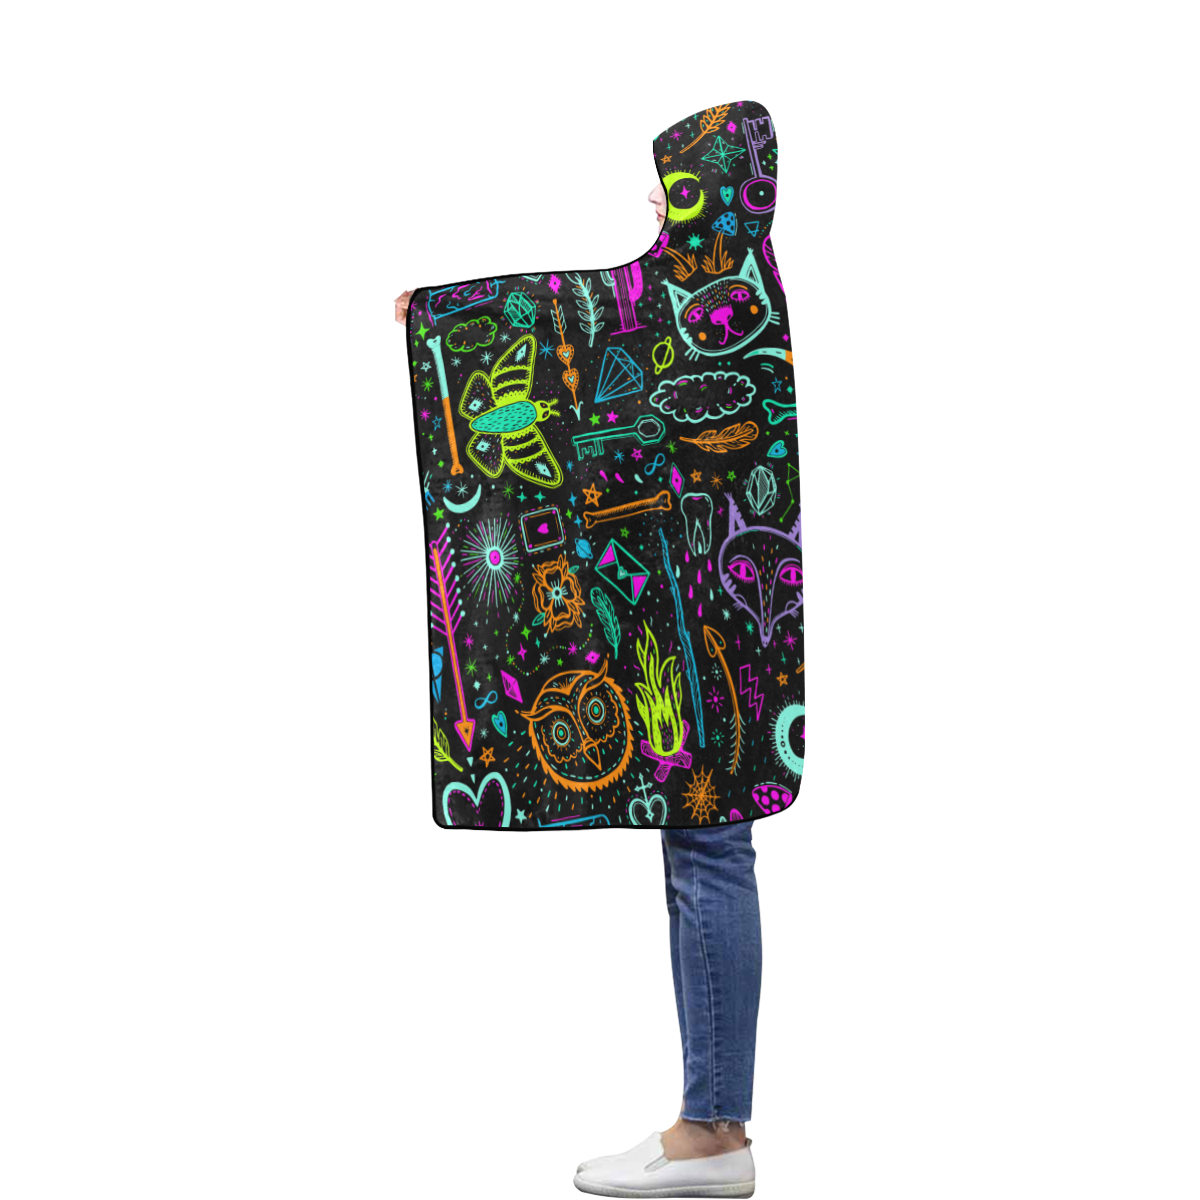 Funny Nature Of Life Sketchnotes Pattern 3 Flannel Hooded Blanket 40''x50''